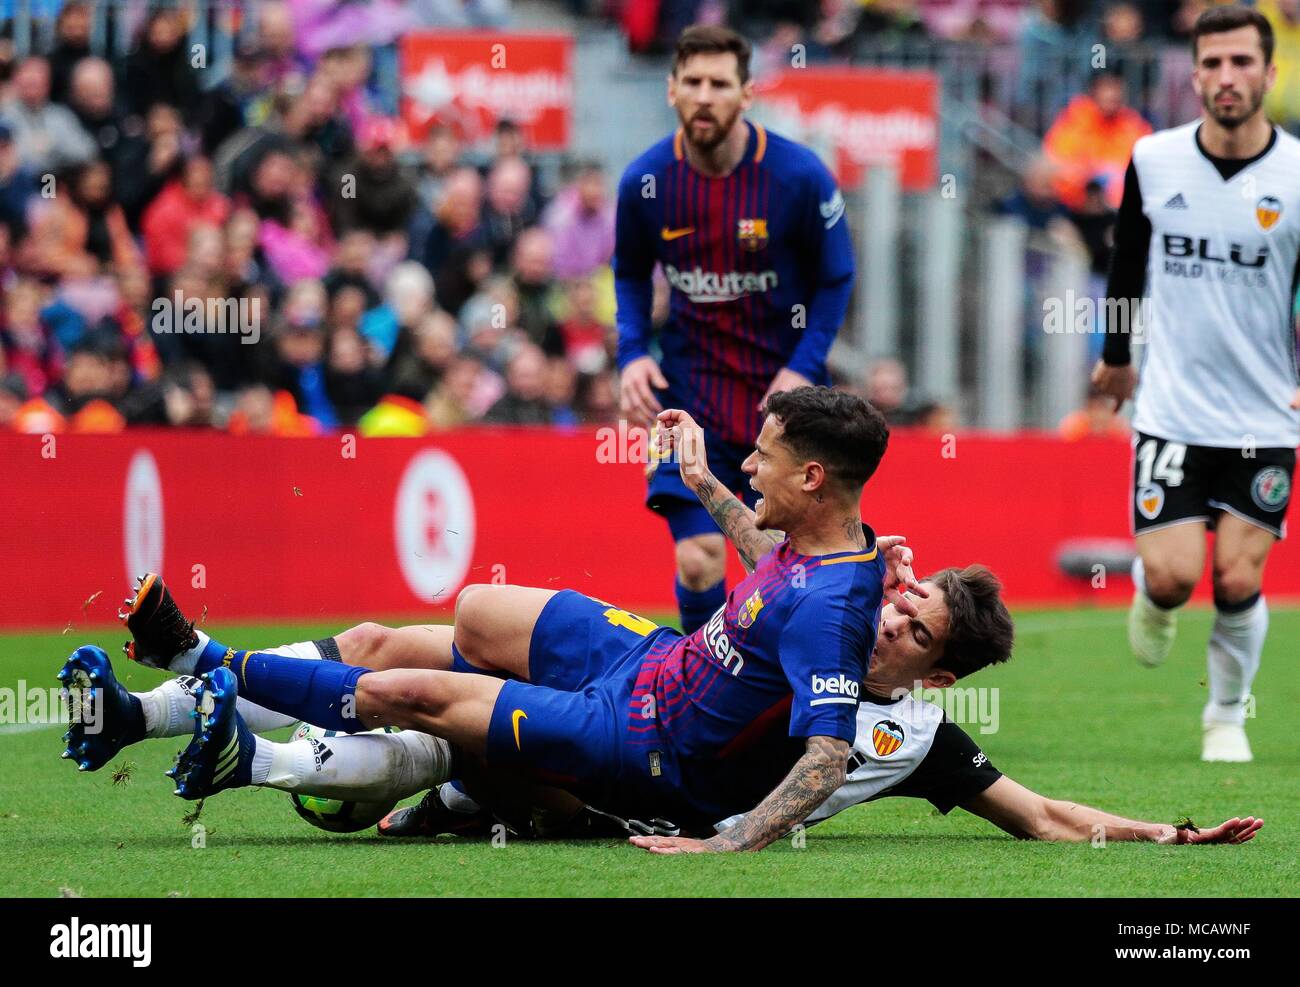 Barcelona, Spain. 14th Apr, 2018. Barcelona's Philippe Coutinho (Front) vies with Valencia's Gabriel Paulista (Bottom) during a Spanish league soccer match between Barcelona and Valencia in Barcelona, Spain, on April 14, 2018. Barcelona won 2-1. Credit: Joan Gosa/Xinhua/Alamy Live News Stock Photo